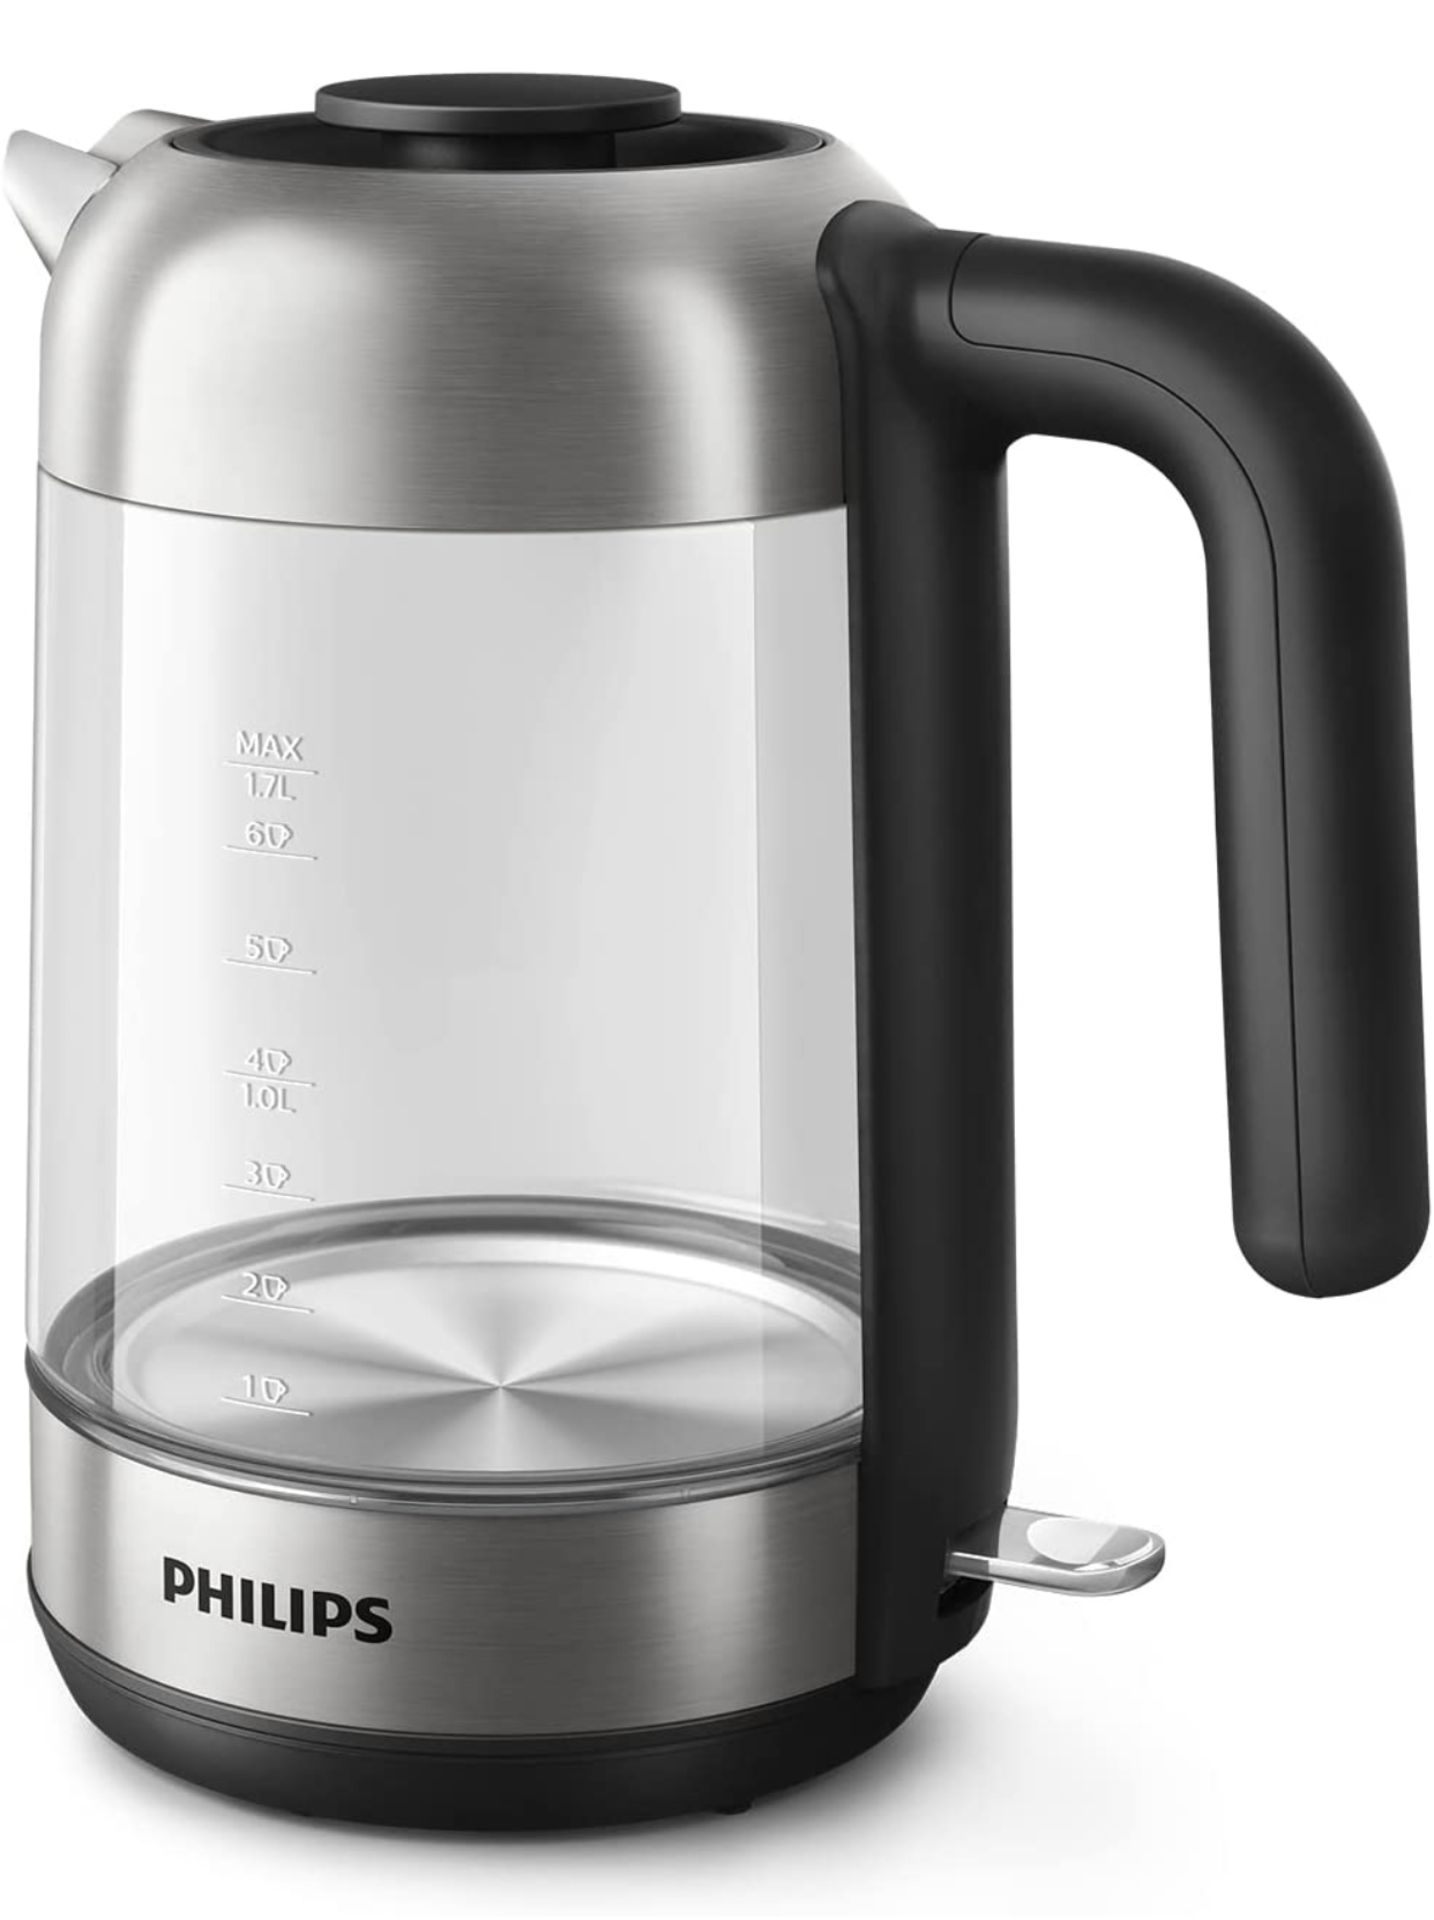 Philips Electric Kettle - HD9339/81 1.7L Glass Kettle RRP £58.99